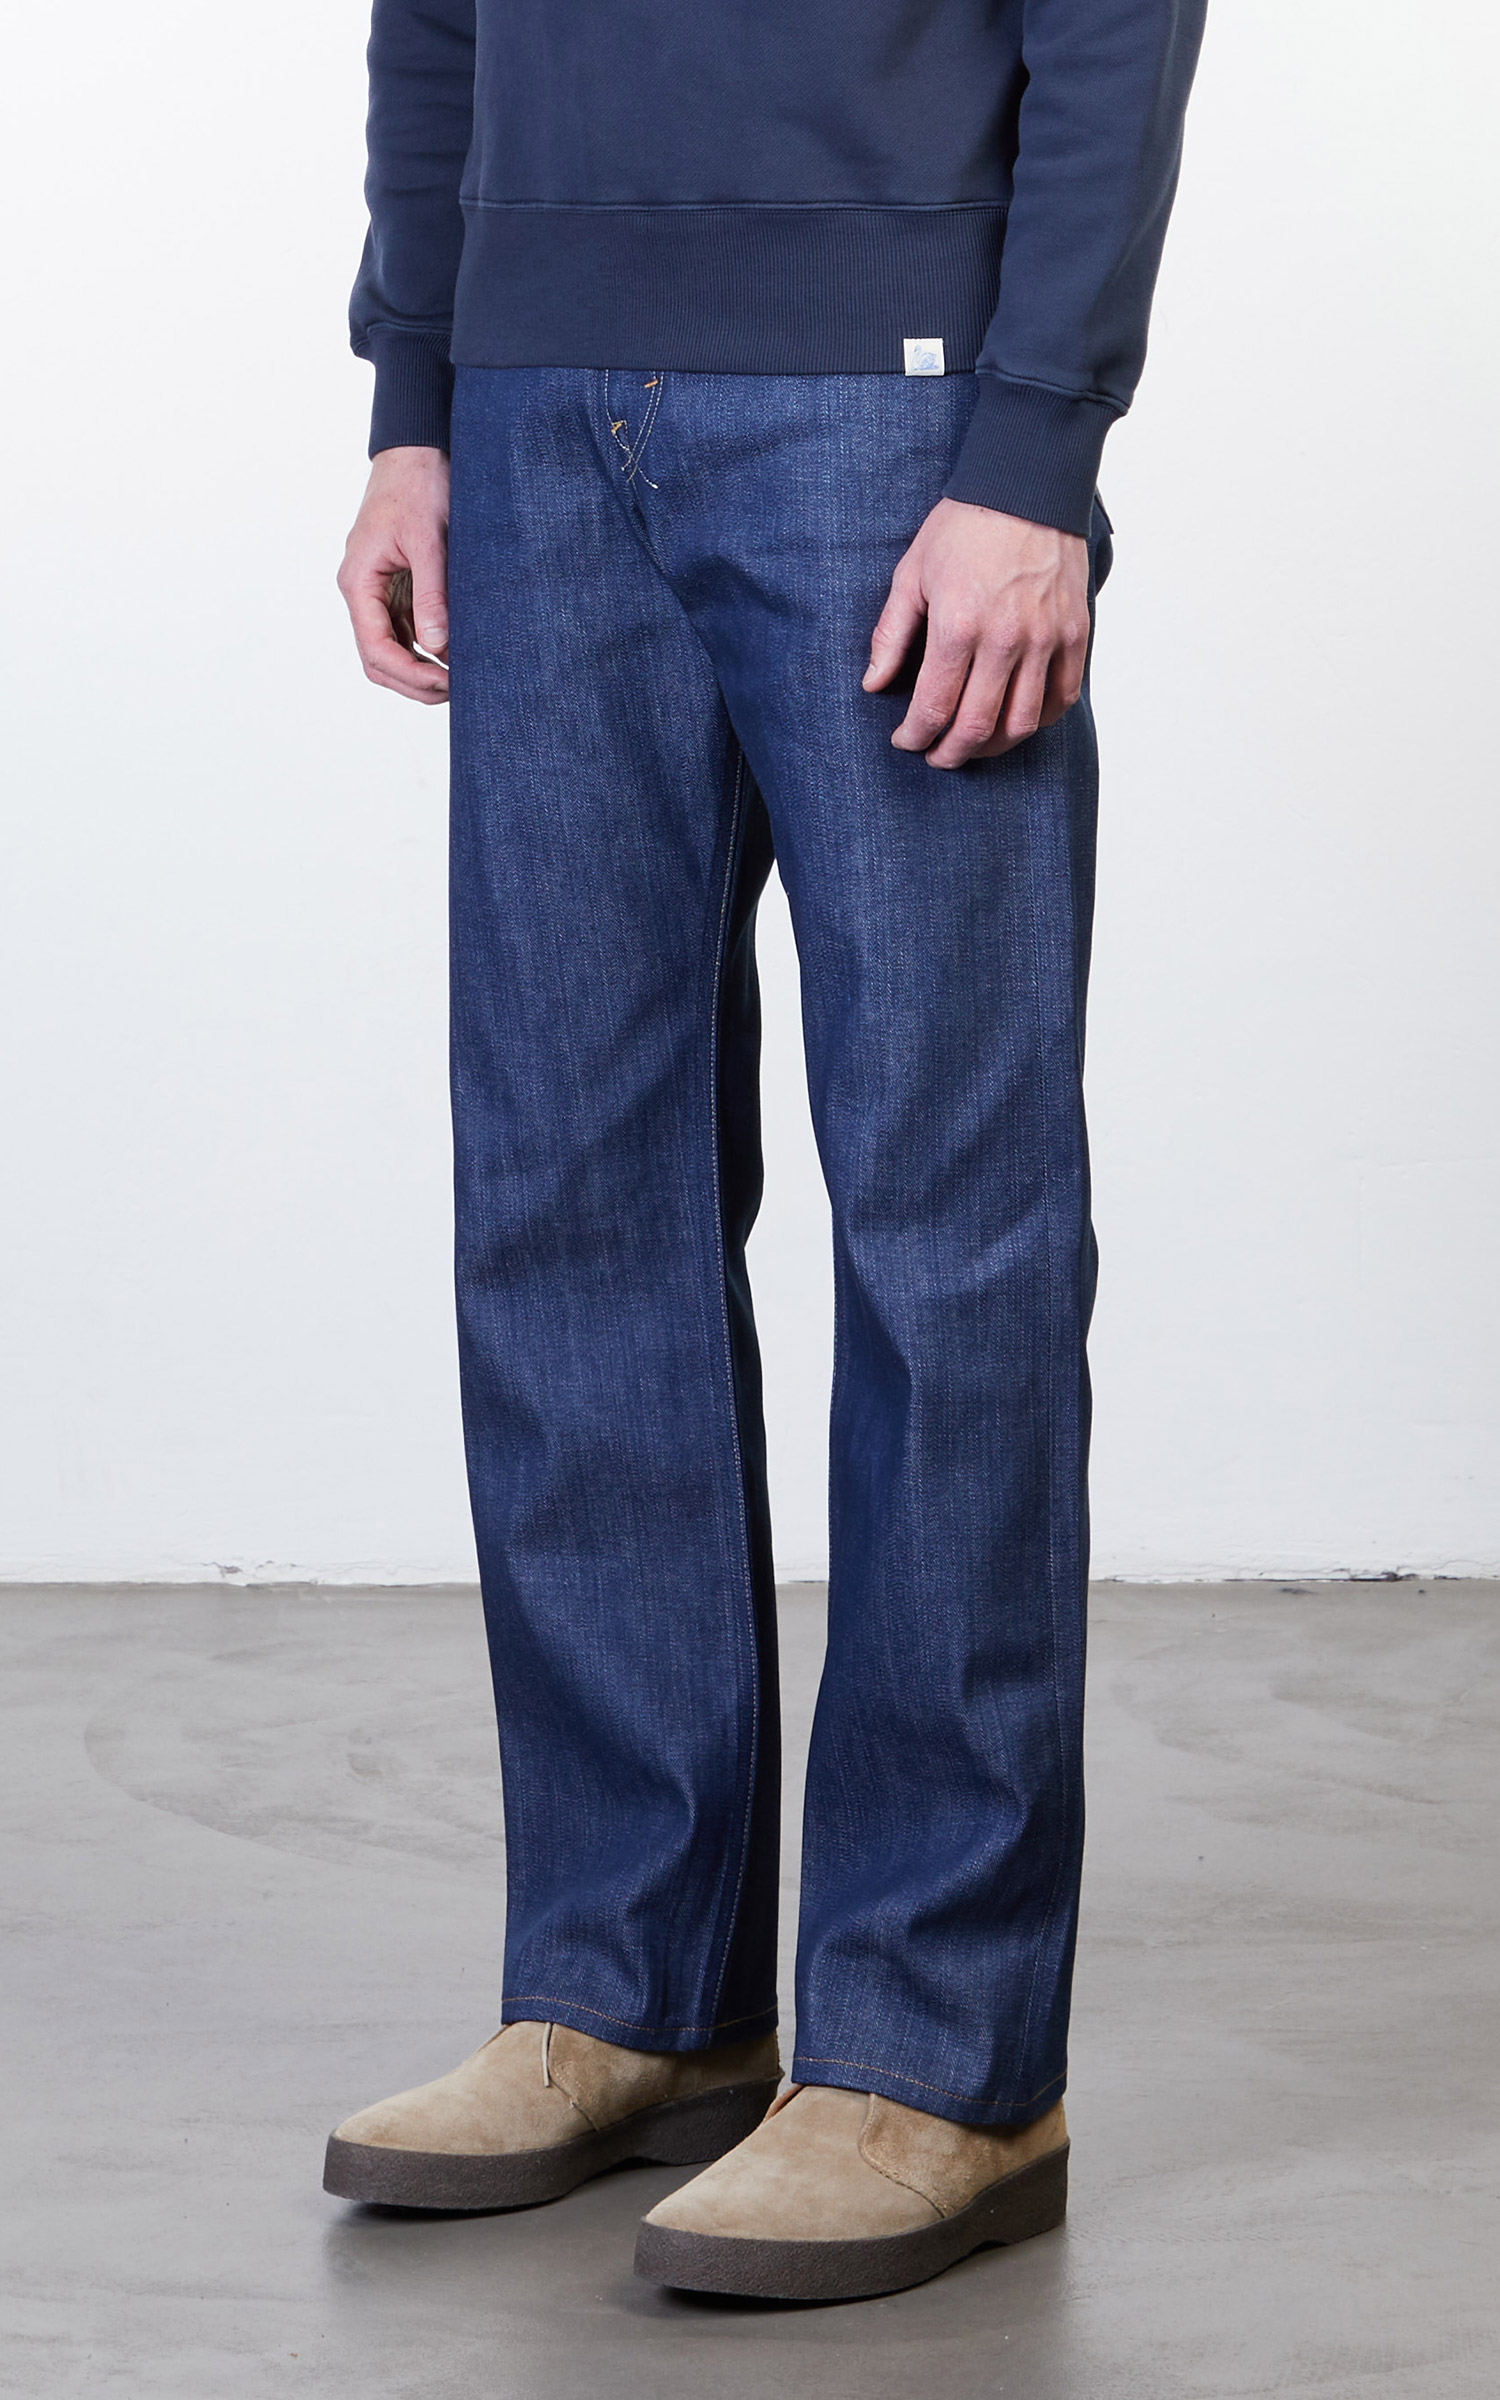 Lee 101 50s Rider Jeans Dry Selvage Natural Indigo 13oz | Cultizm